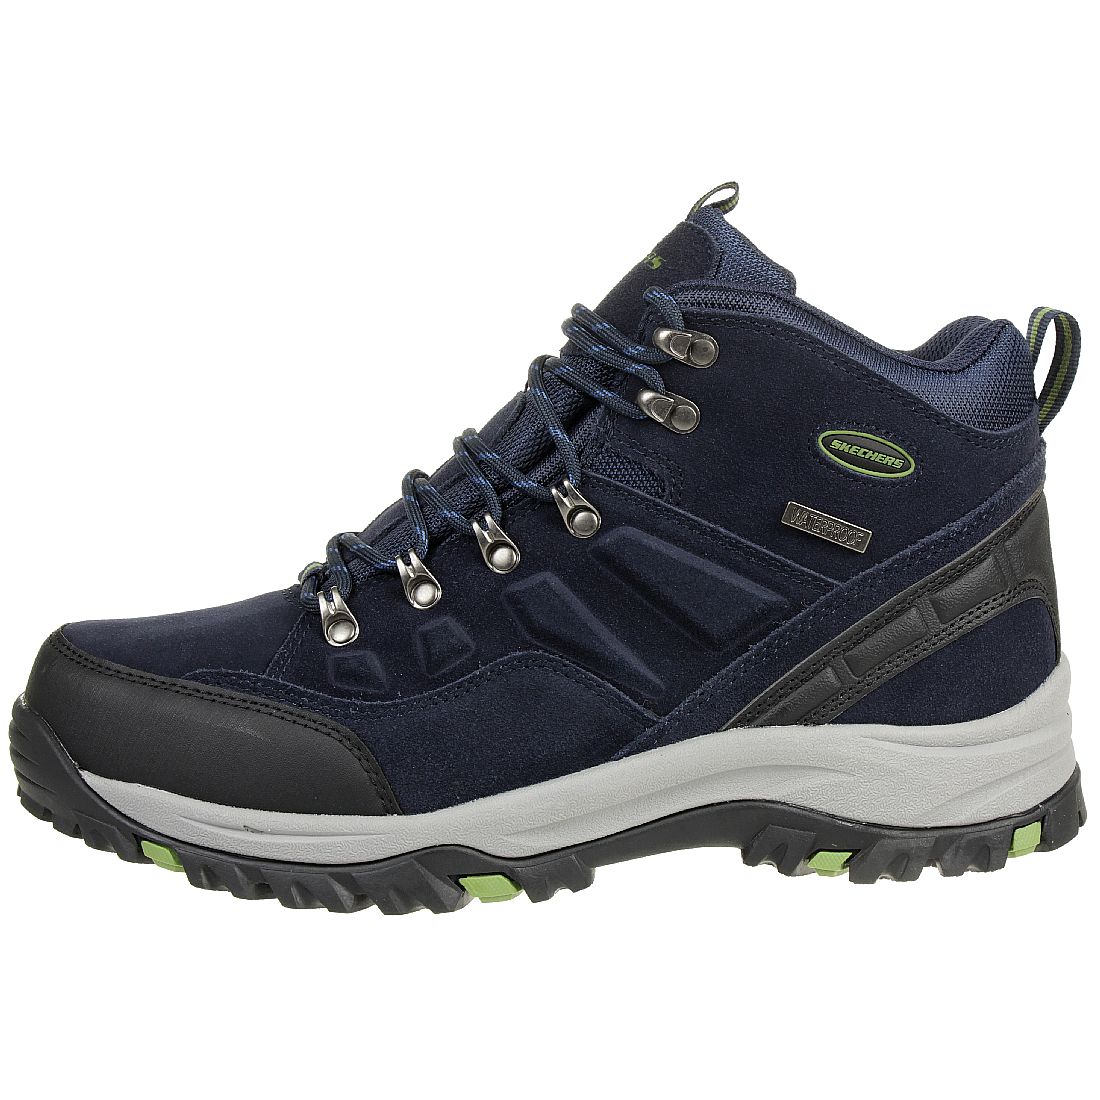 Skechers RELMENT PELMO Stiefel Outdoor Schuhe Waterproof RELAXED FIT NVY